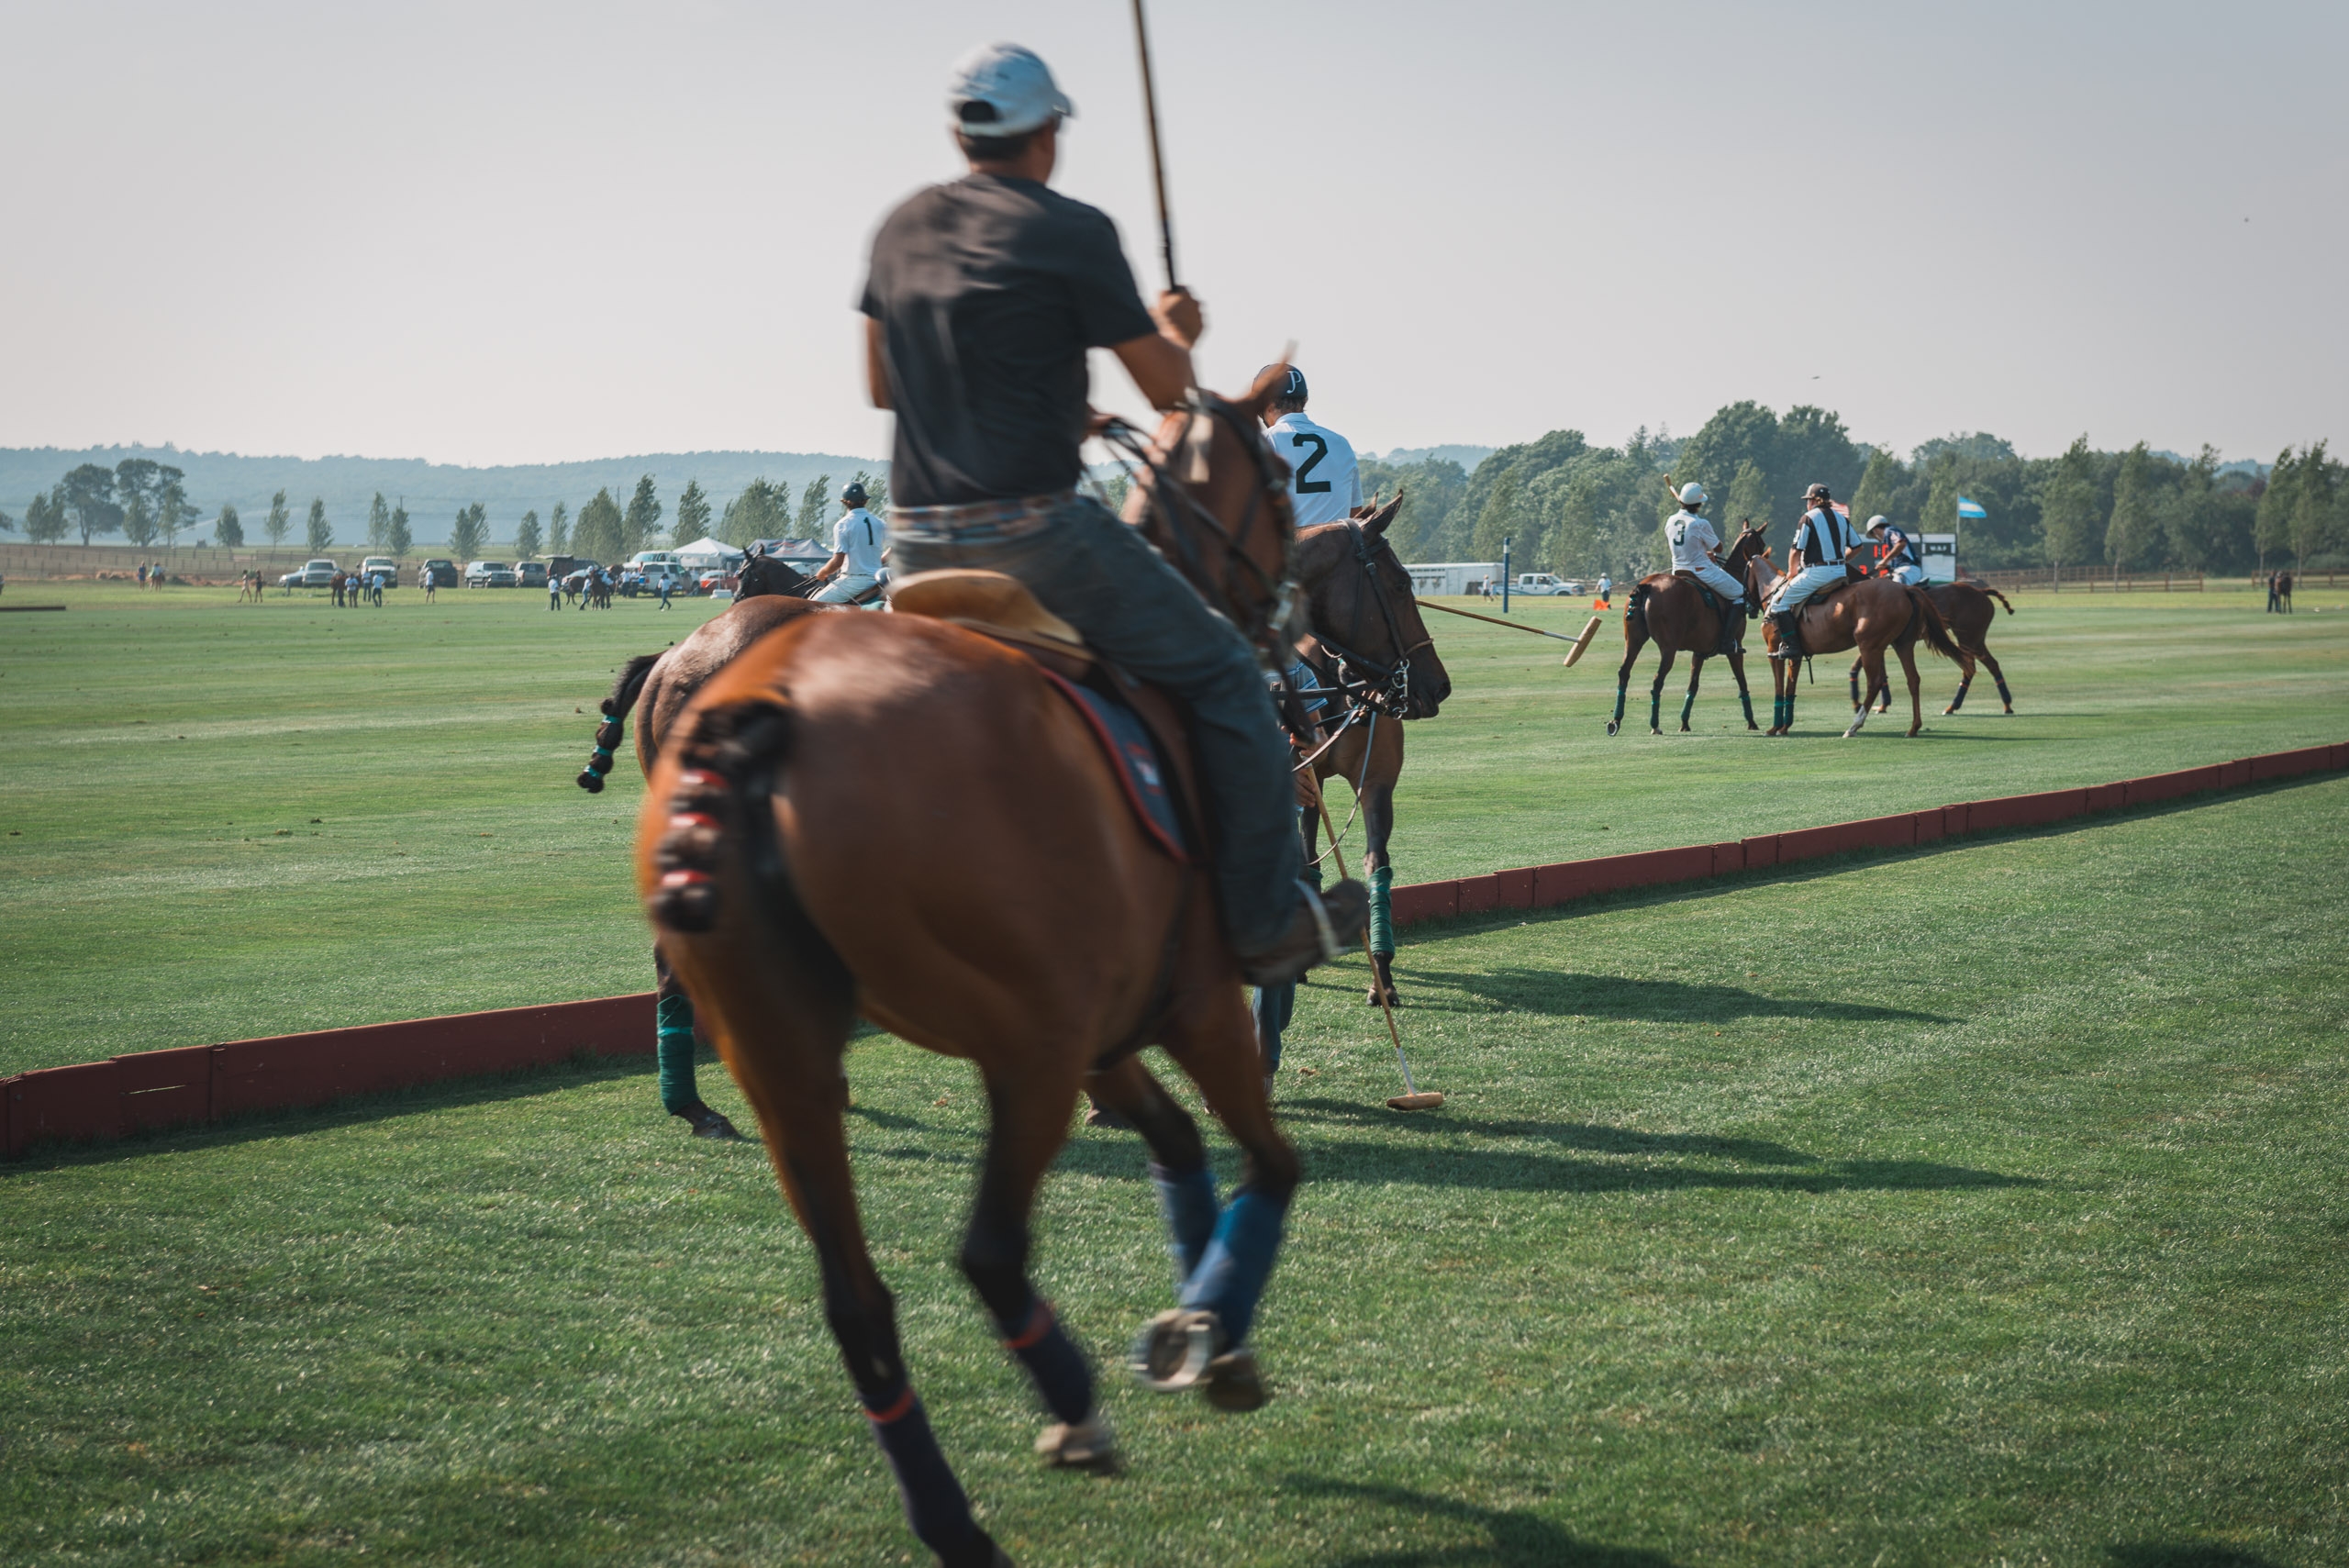 The Polo Match Begins